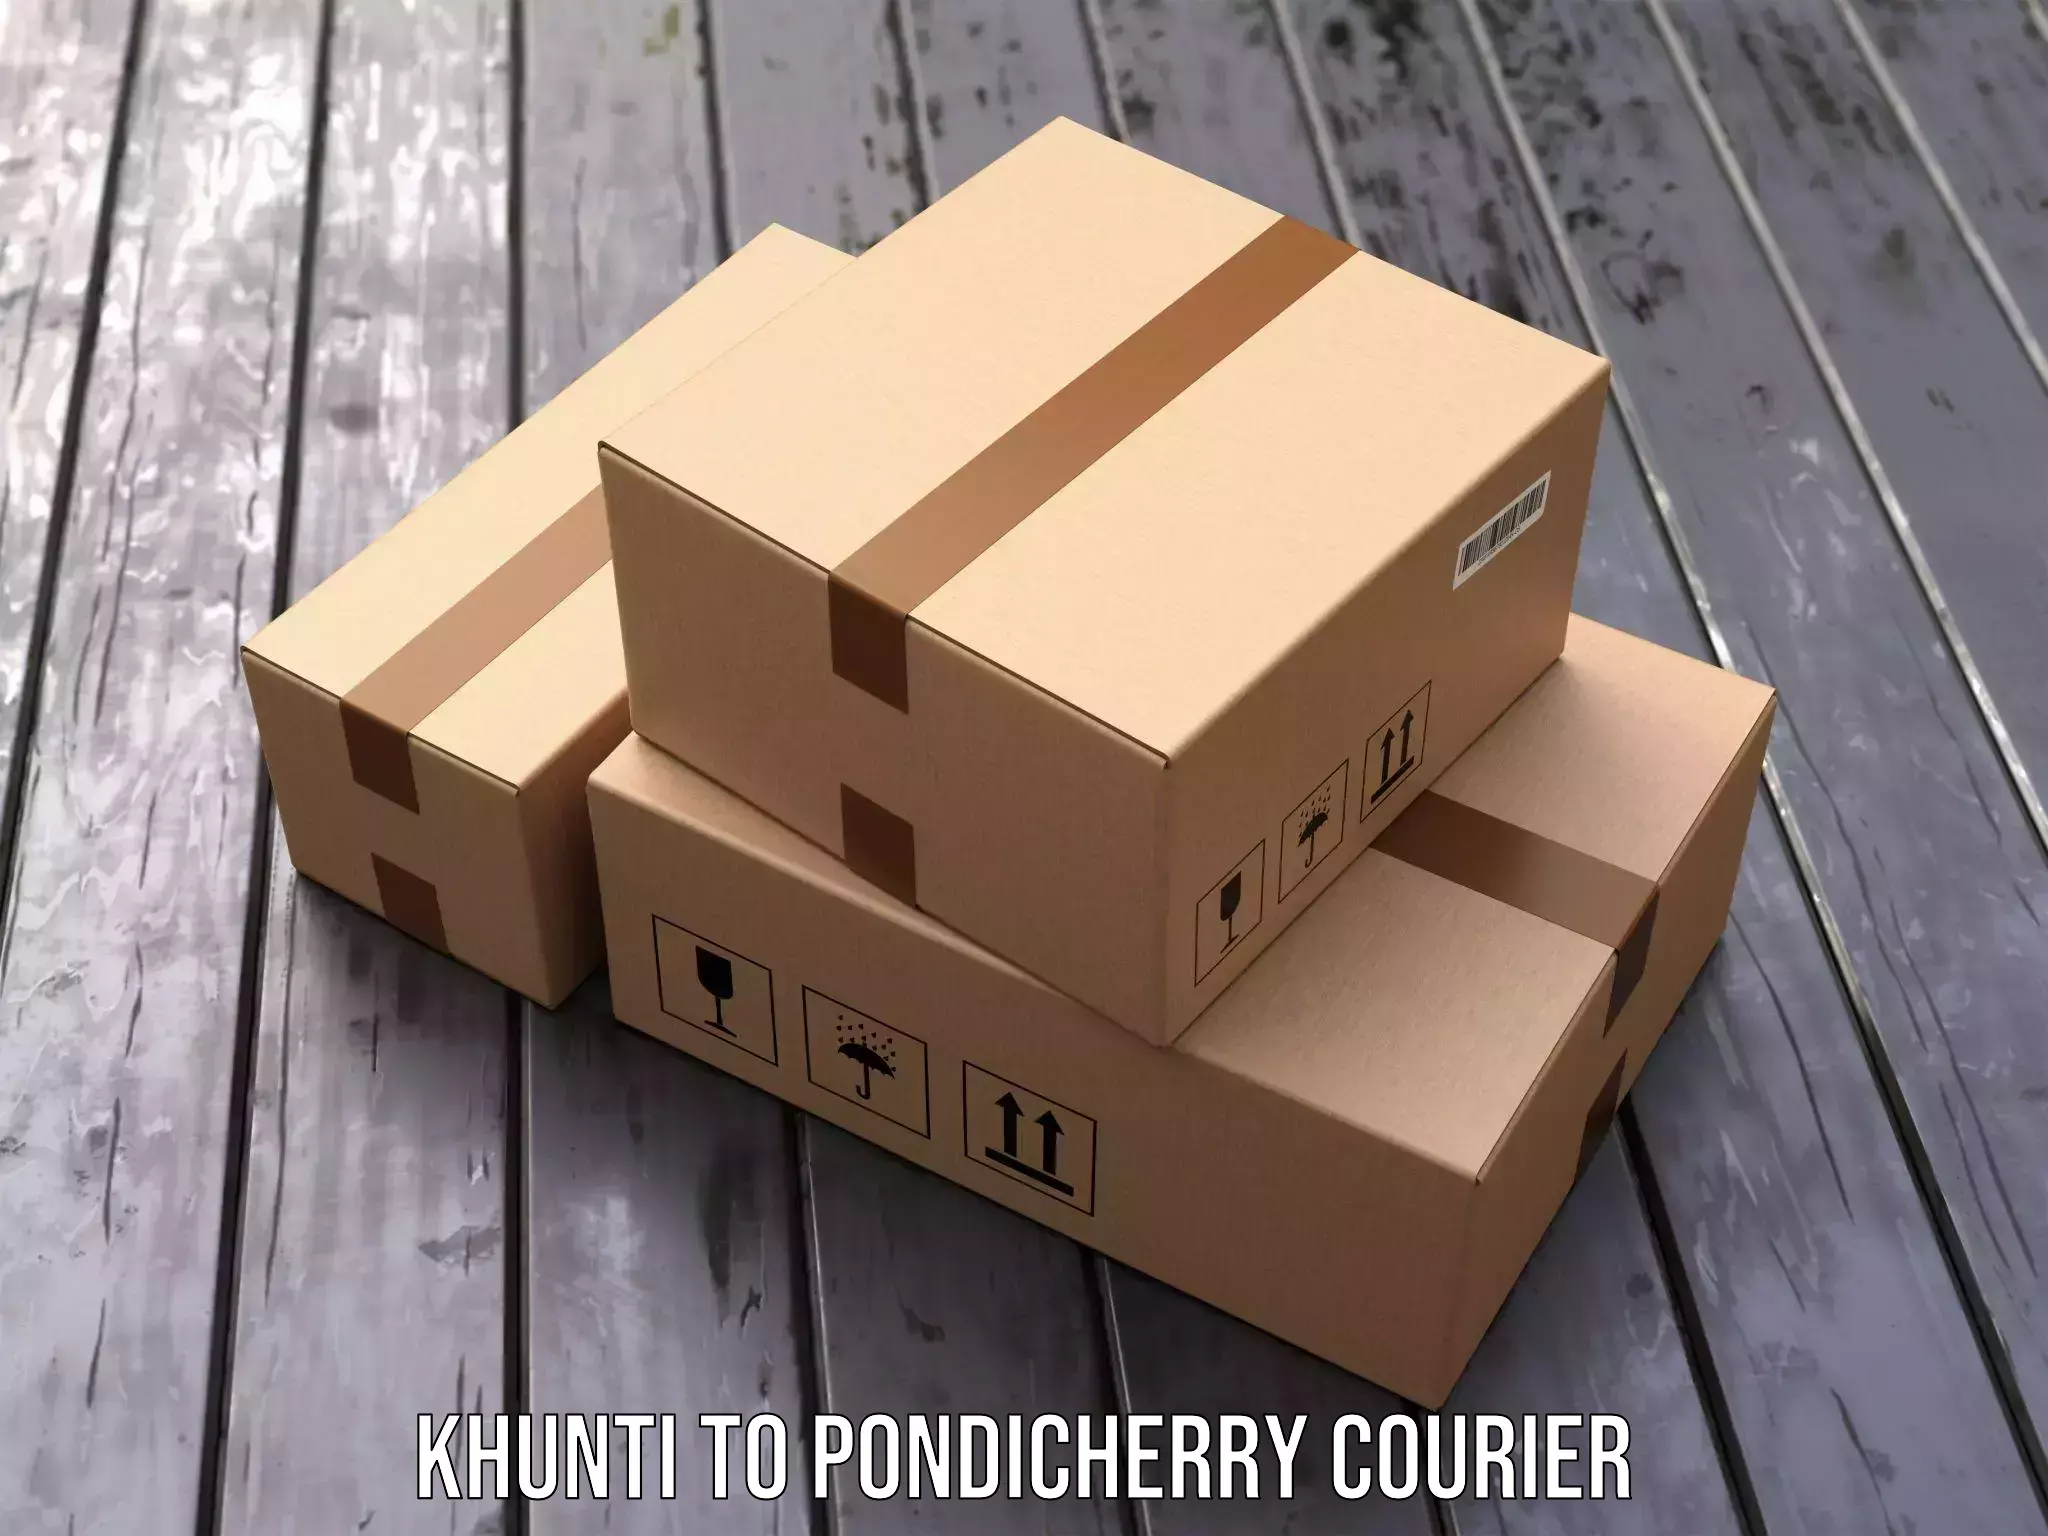 Cash on delivery service Khunti to Pondicherry